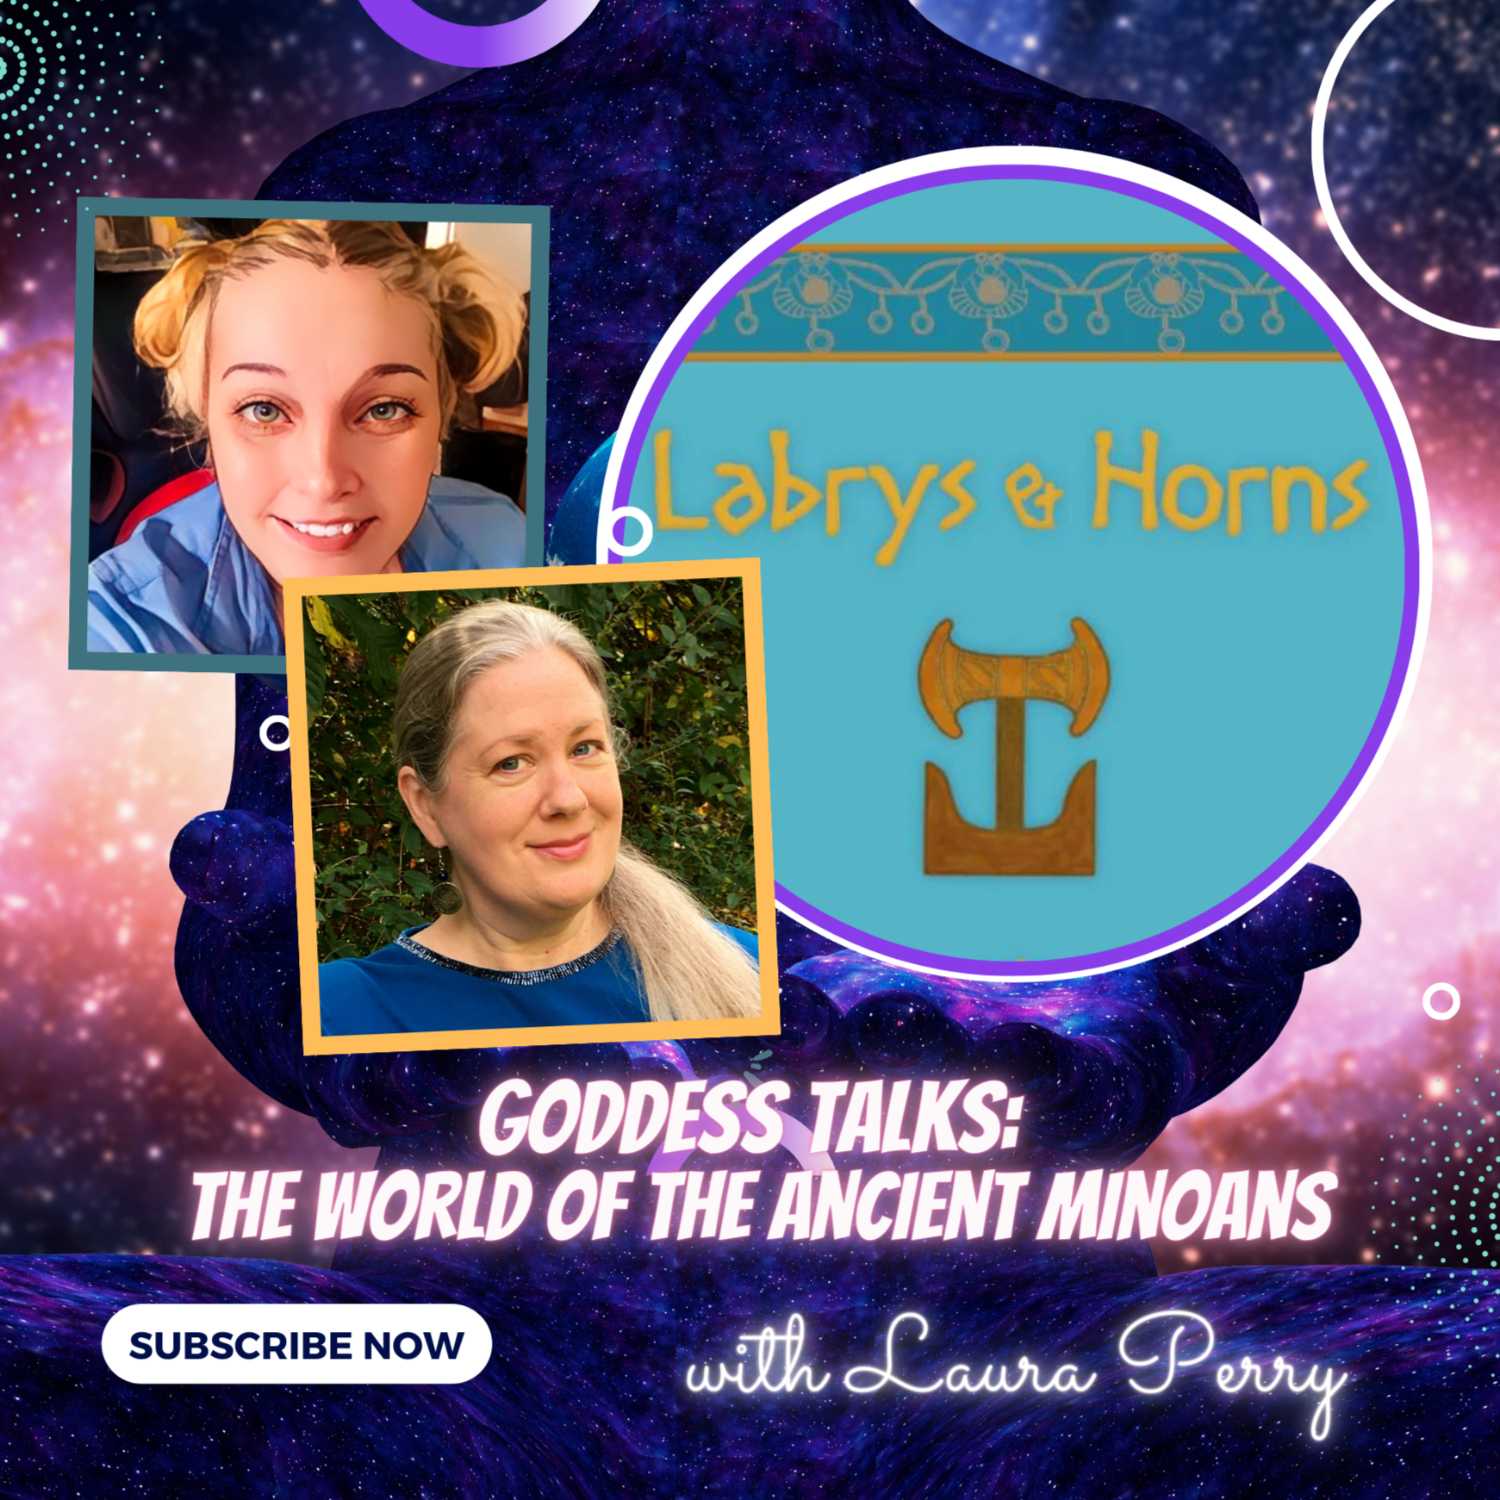 GODDESS TALKS: The World of the Ancient Minoans  - with Laura Perry